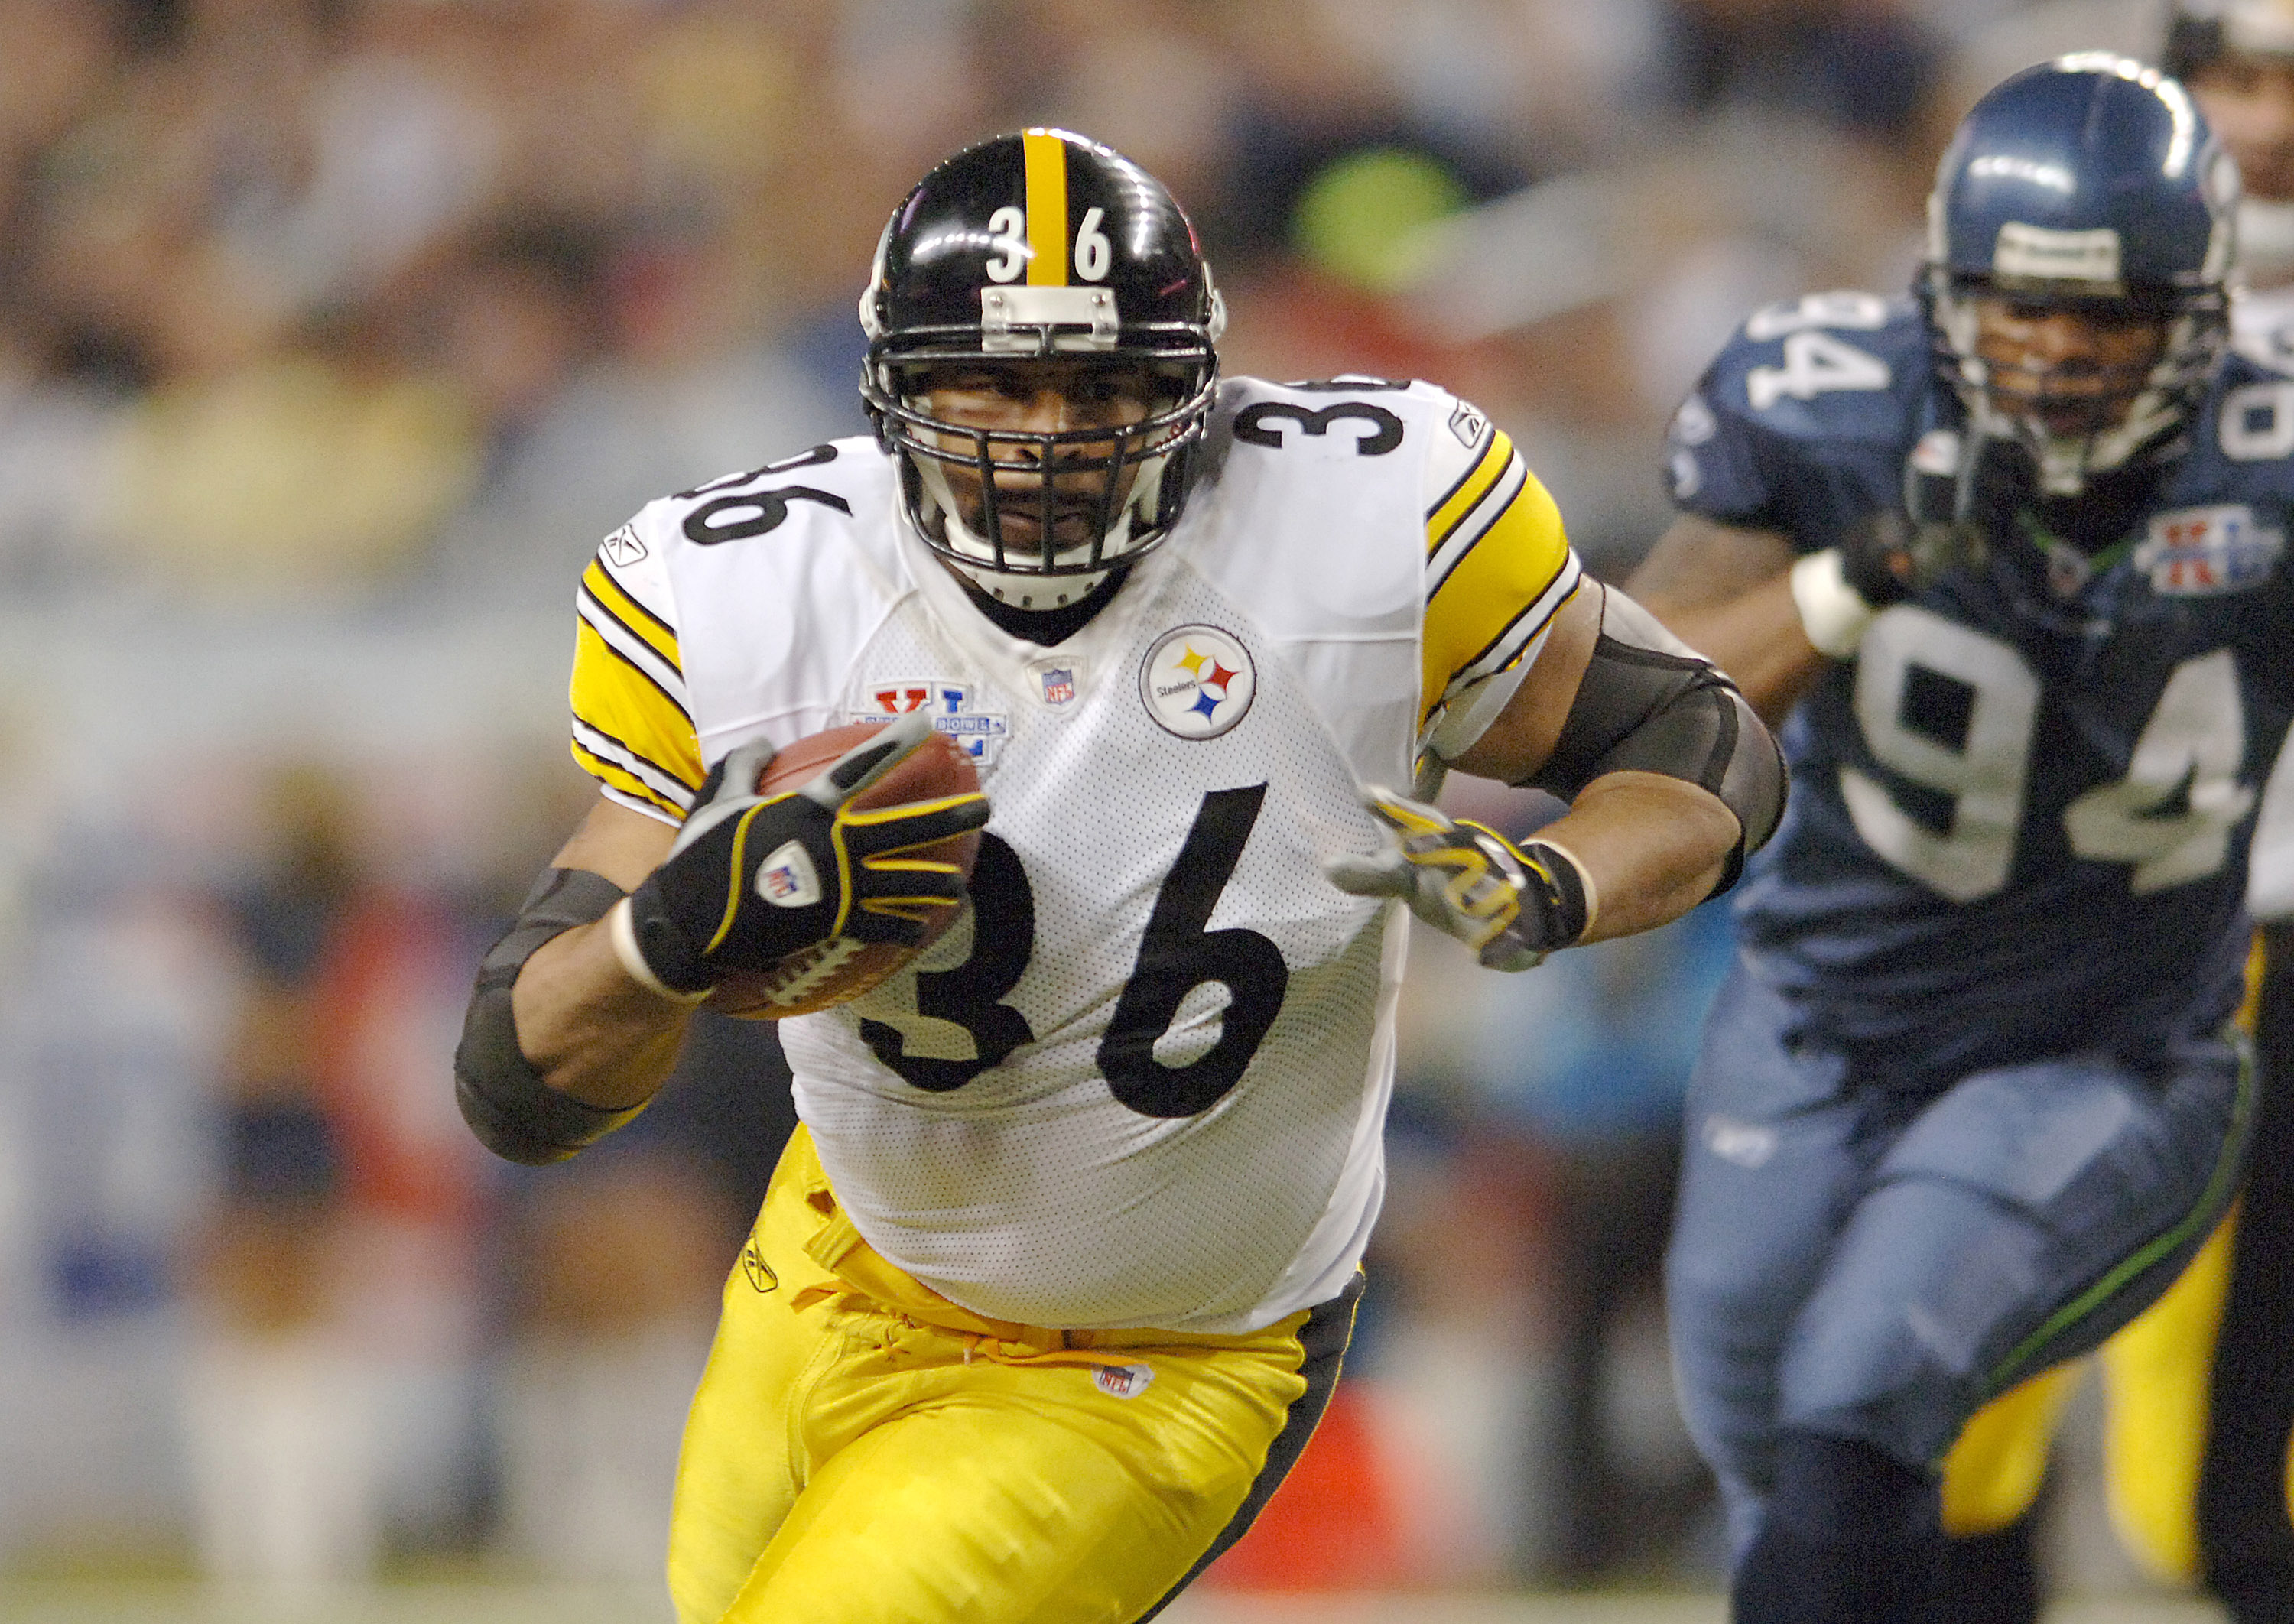 Steelers Jerome Bettis during Super Bowl XL between the Pittsburgh Steelers and Seattle Seahawks at Ford Field in Detroit, Michigan on February 5, 2006.  (Photo by Al Messerschmidt/Getty Images)